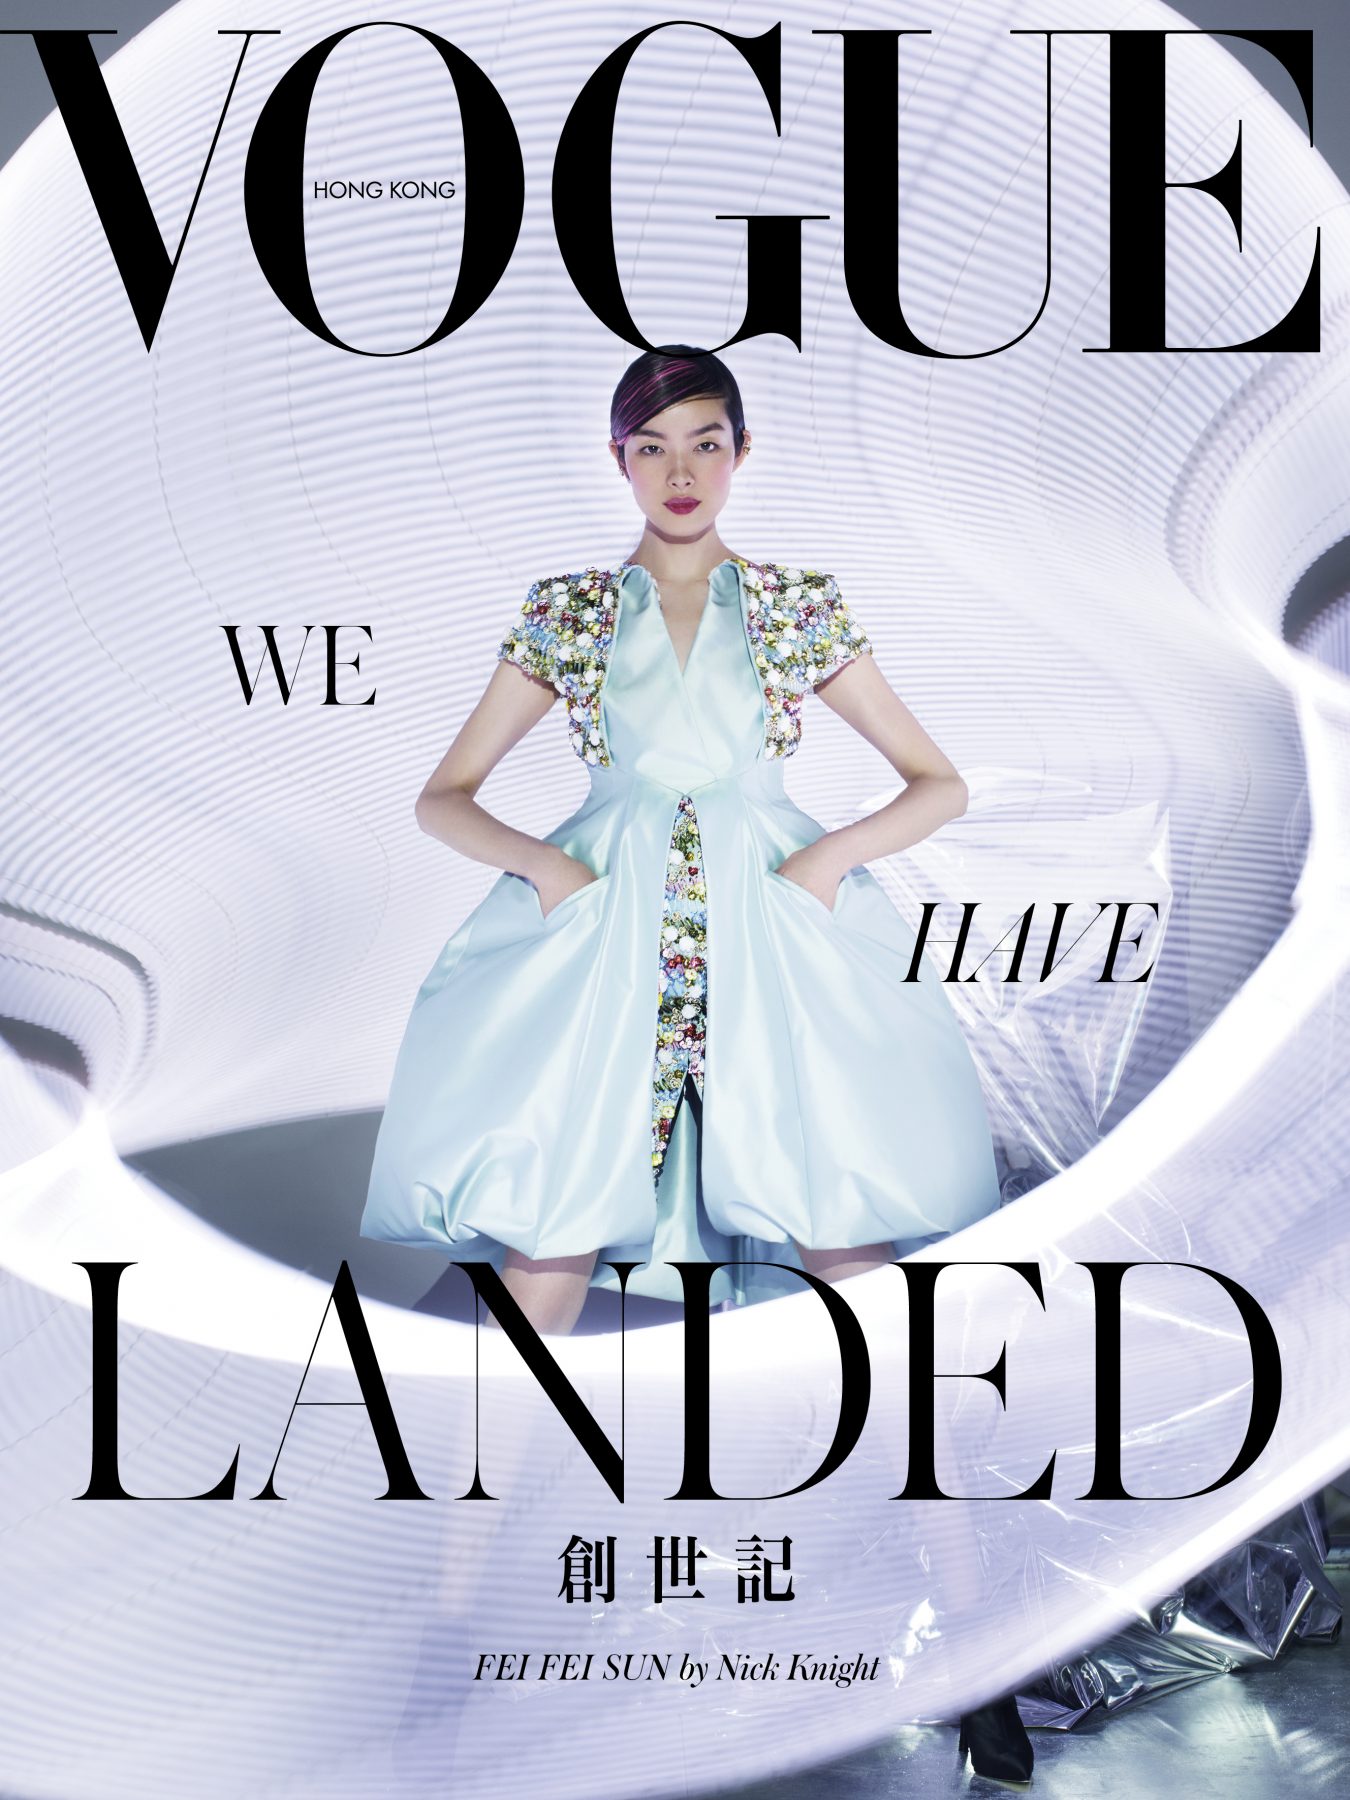 Vogue Hong Kong Captured Karl Lagerfeld's Last Couture Collection